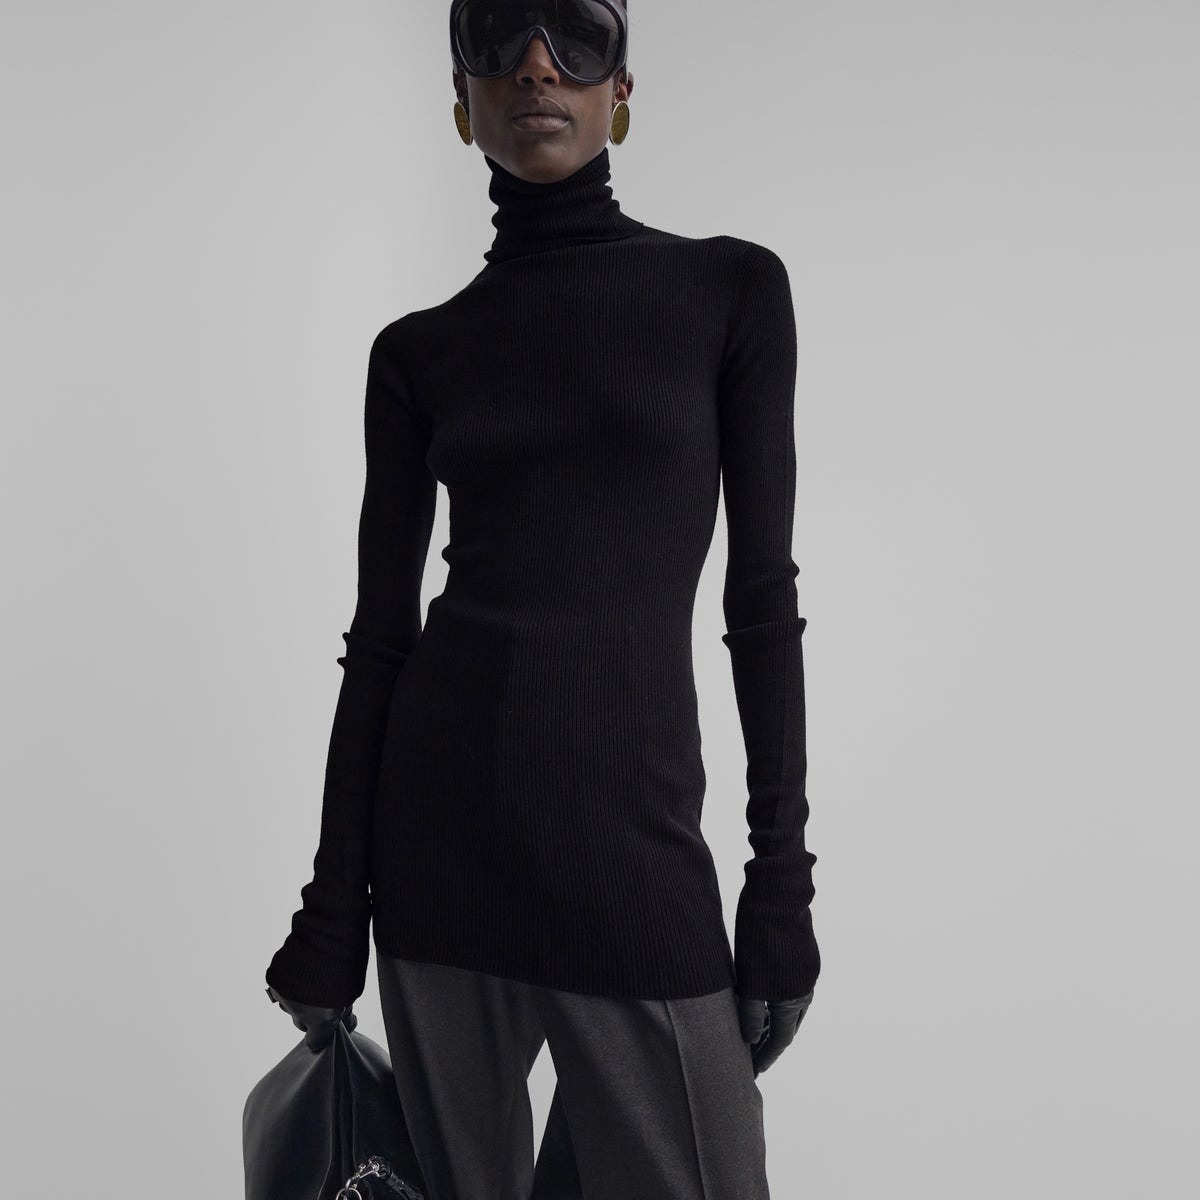 The wait is over, Phoebe Philo finally drops her first collection